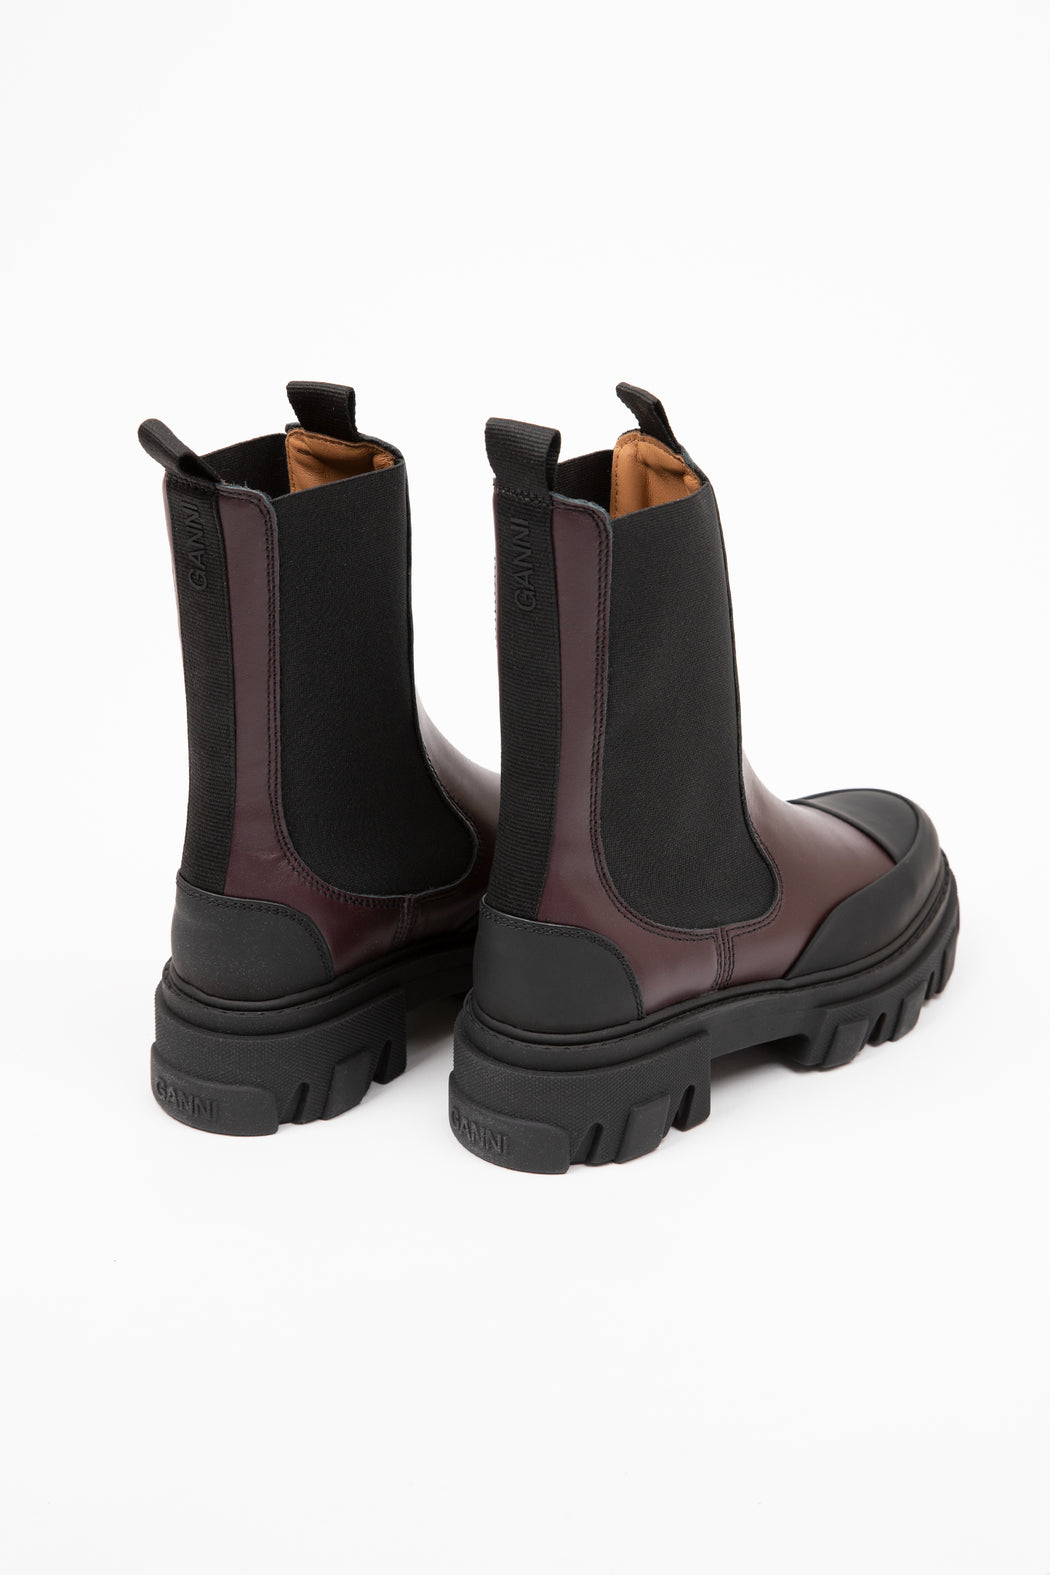    Ganni-Cleated-Mid-Chelsea-Boots-Burgundy